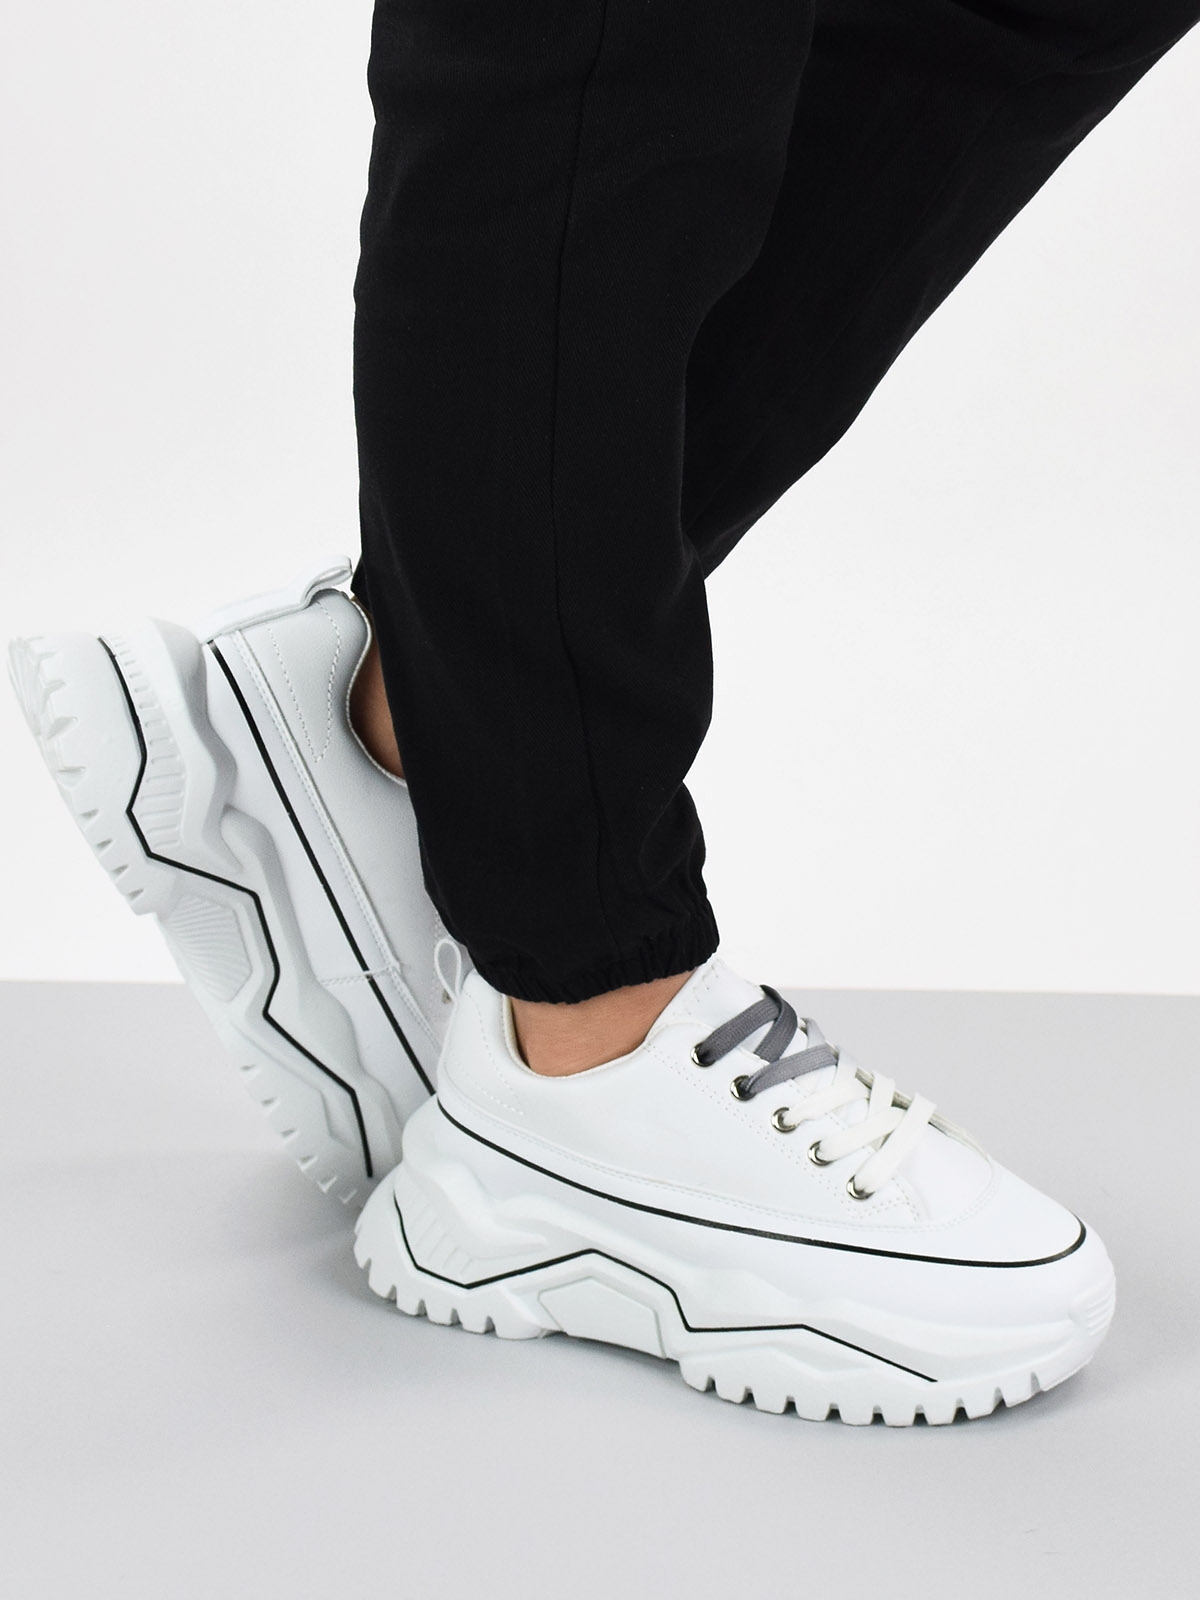 Lace up chunky sole women's trainers in white